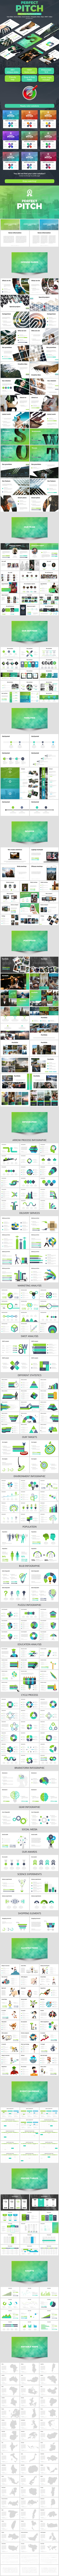 GraphicRiver Perfect Pitch Deck 20898308